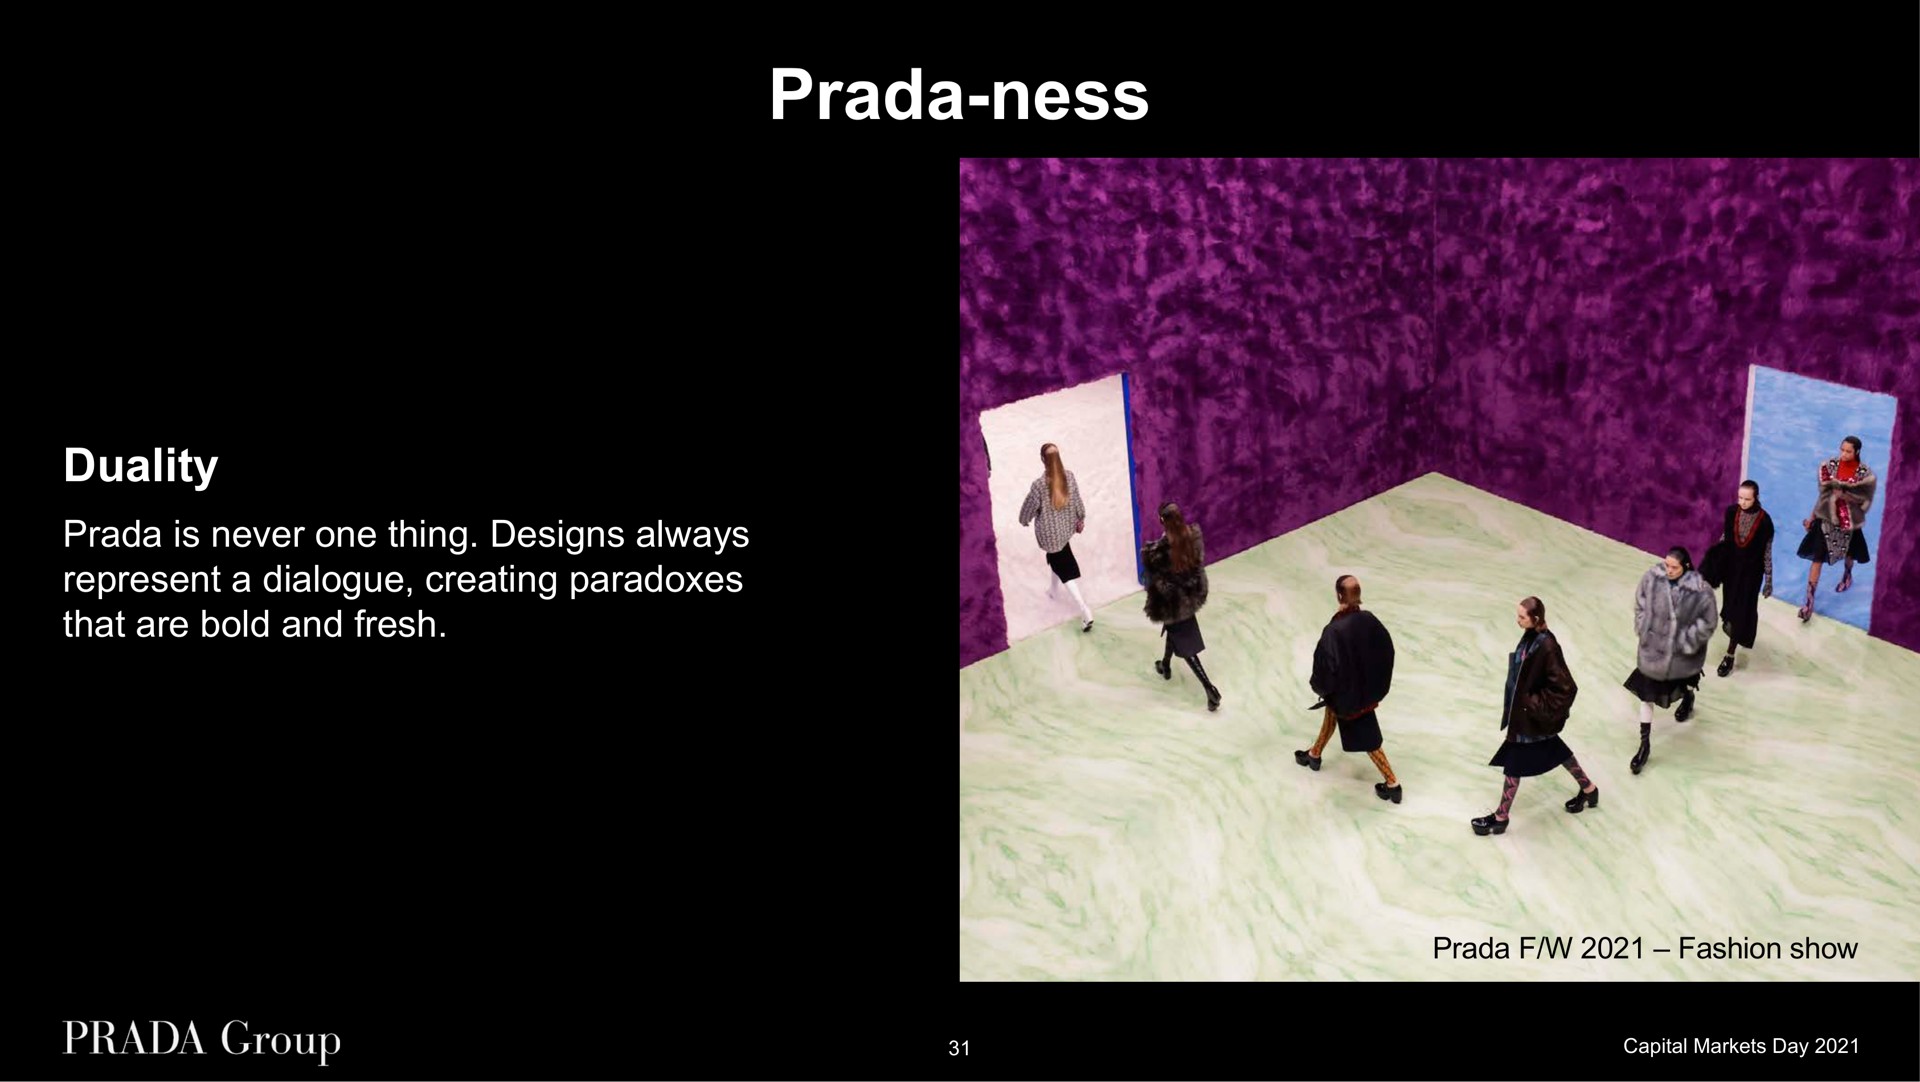 ness duality is never one thing designs always represent a dialogue creating paradoxes that are bold and fresh fashion show | Prada